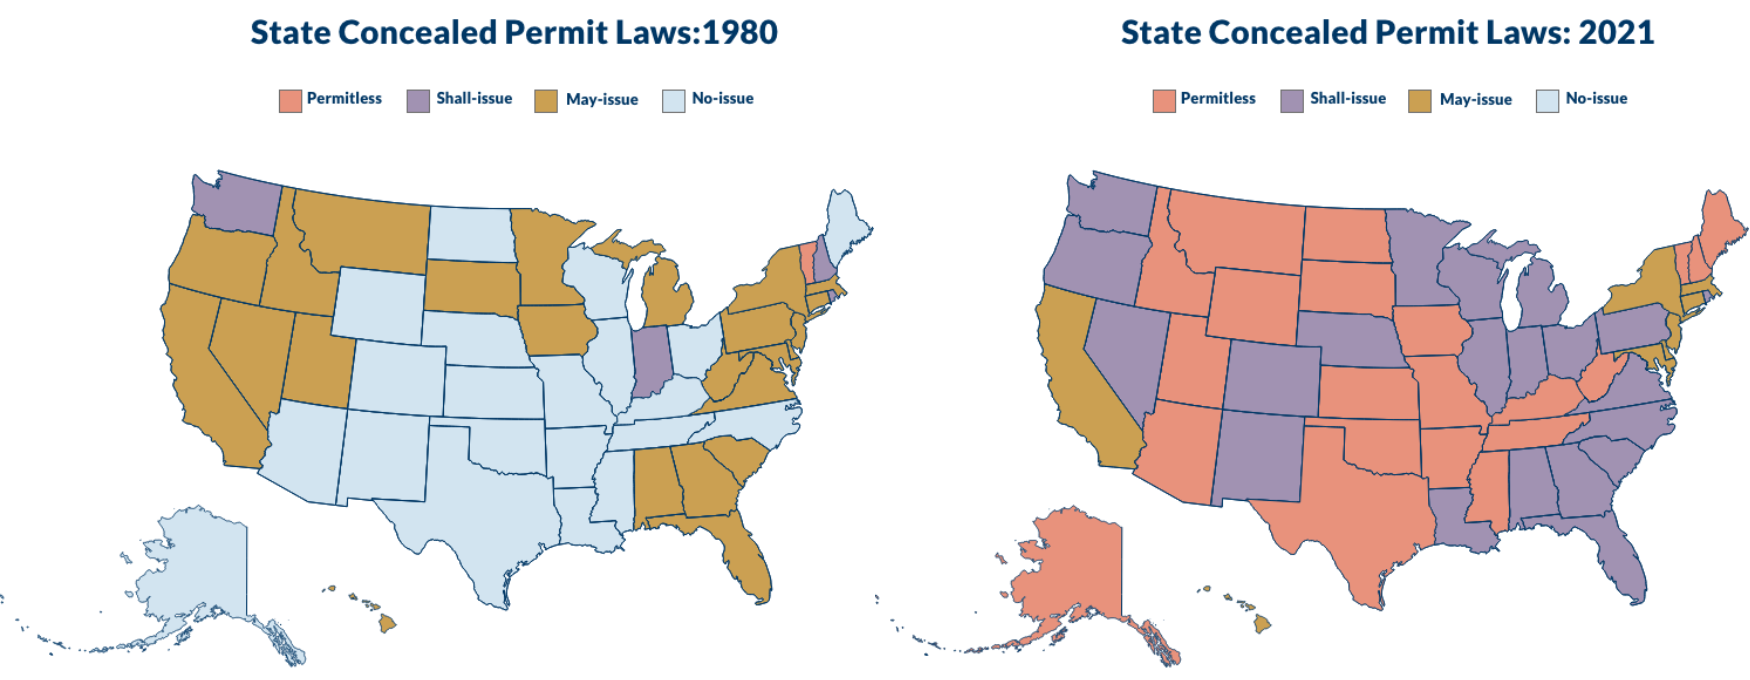 Map of states that have state concealed permit laws in 1980 vs 2021